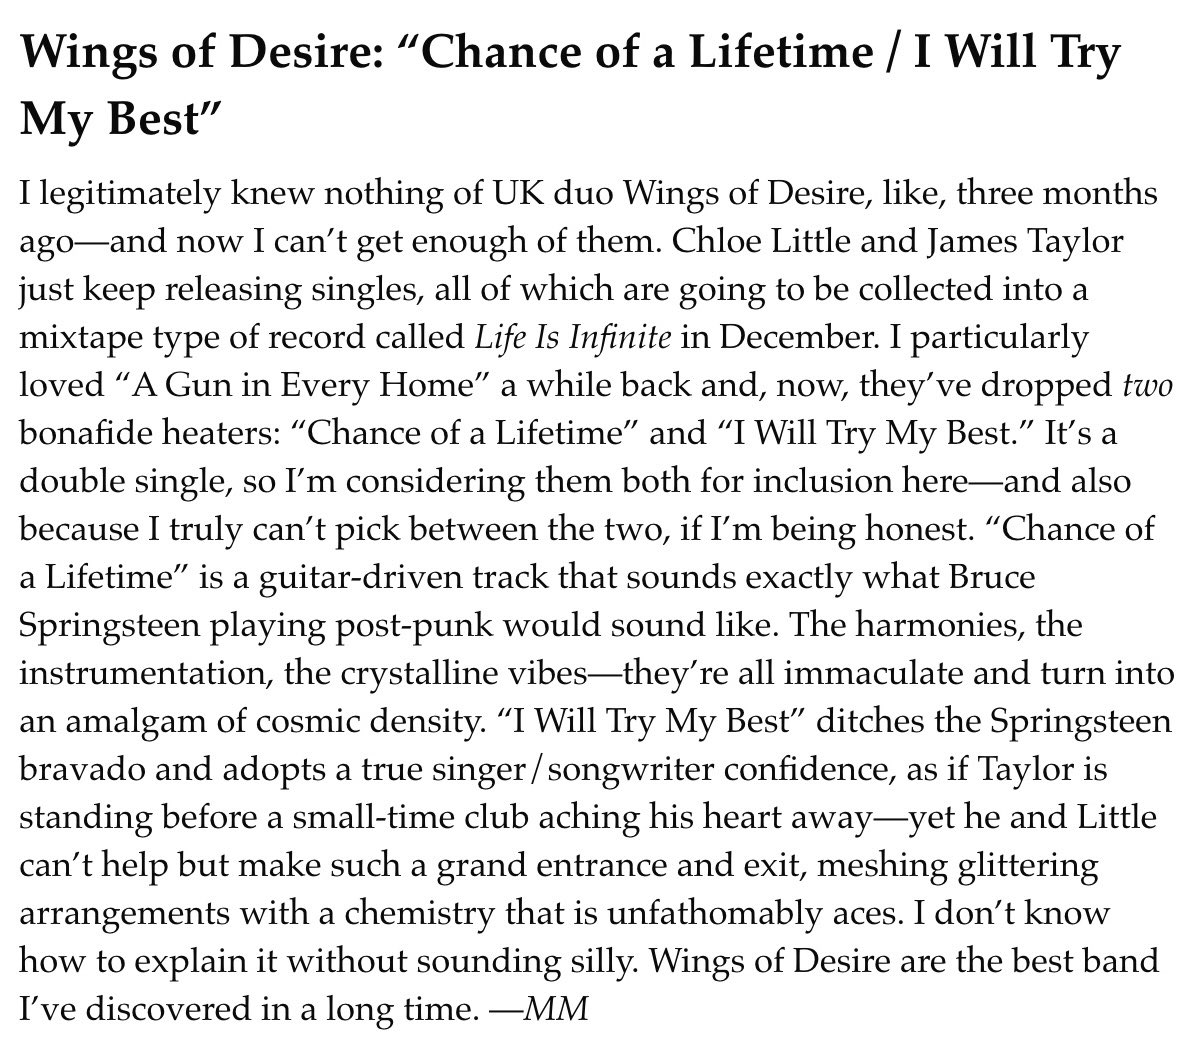 ‘An amalgam of cosmic density. Wings of Desire are the best band I’ve discovered in a long time.’ Thank you Paste Magazine for including us in this weeks best new songs 🤍 pastemagazine.com/music/best-son…